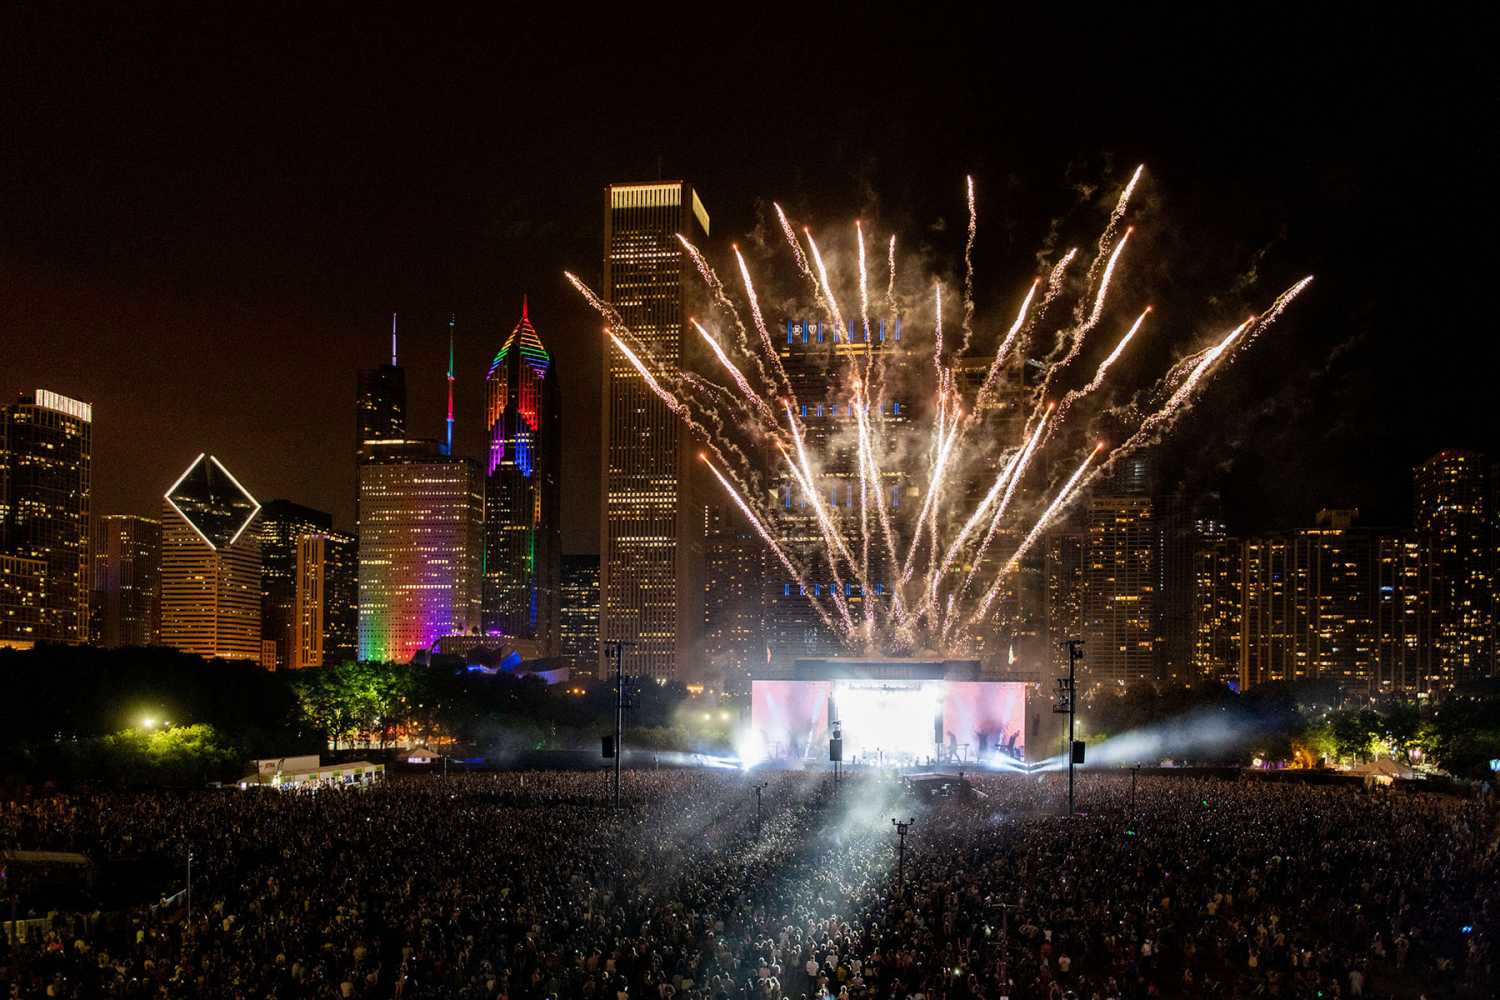 Lollapalooza’s 2018 Chicago festival drew more than 100,000 fans to Grant Park each day